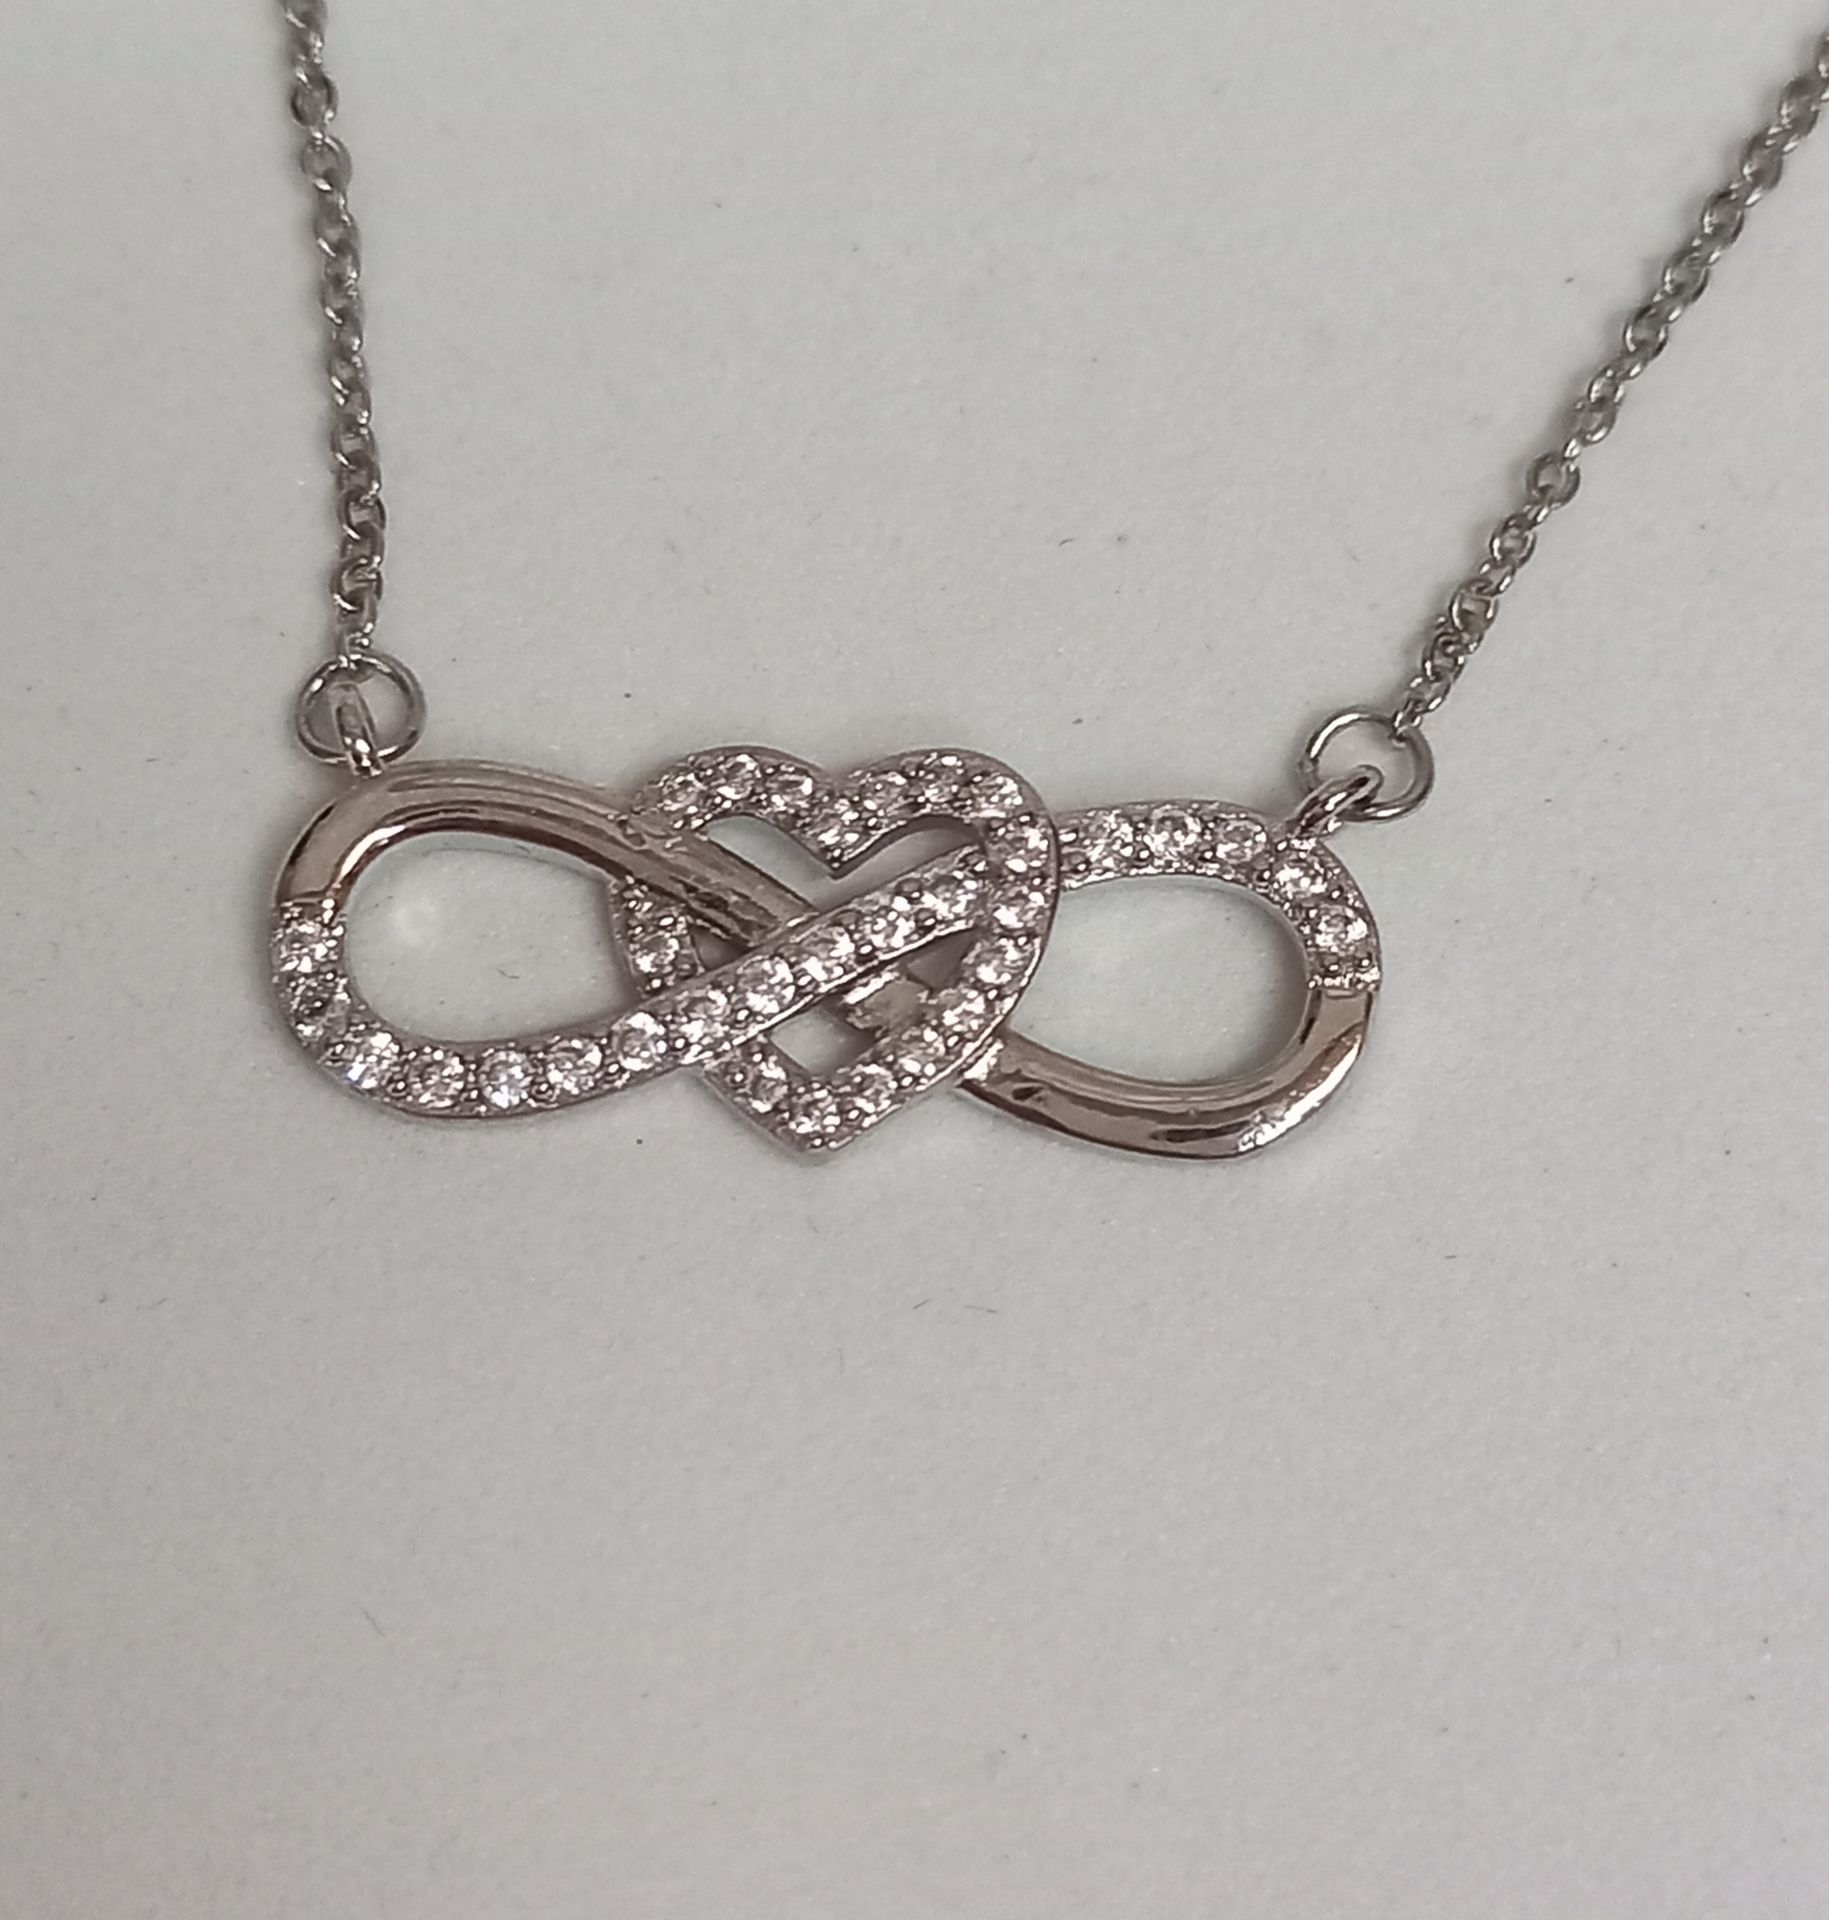 SILVER INFINITY HEART PENDANT - Image 3 of 5